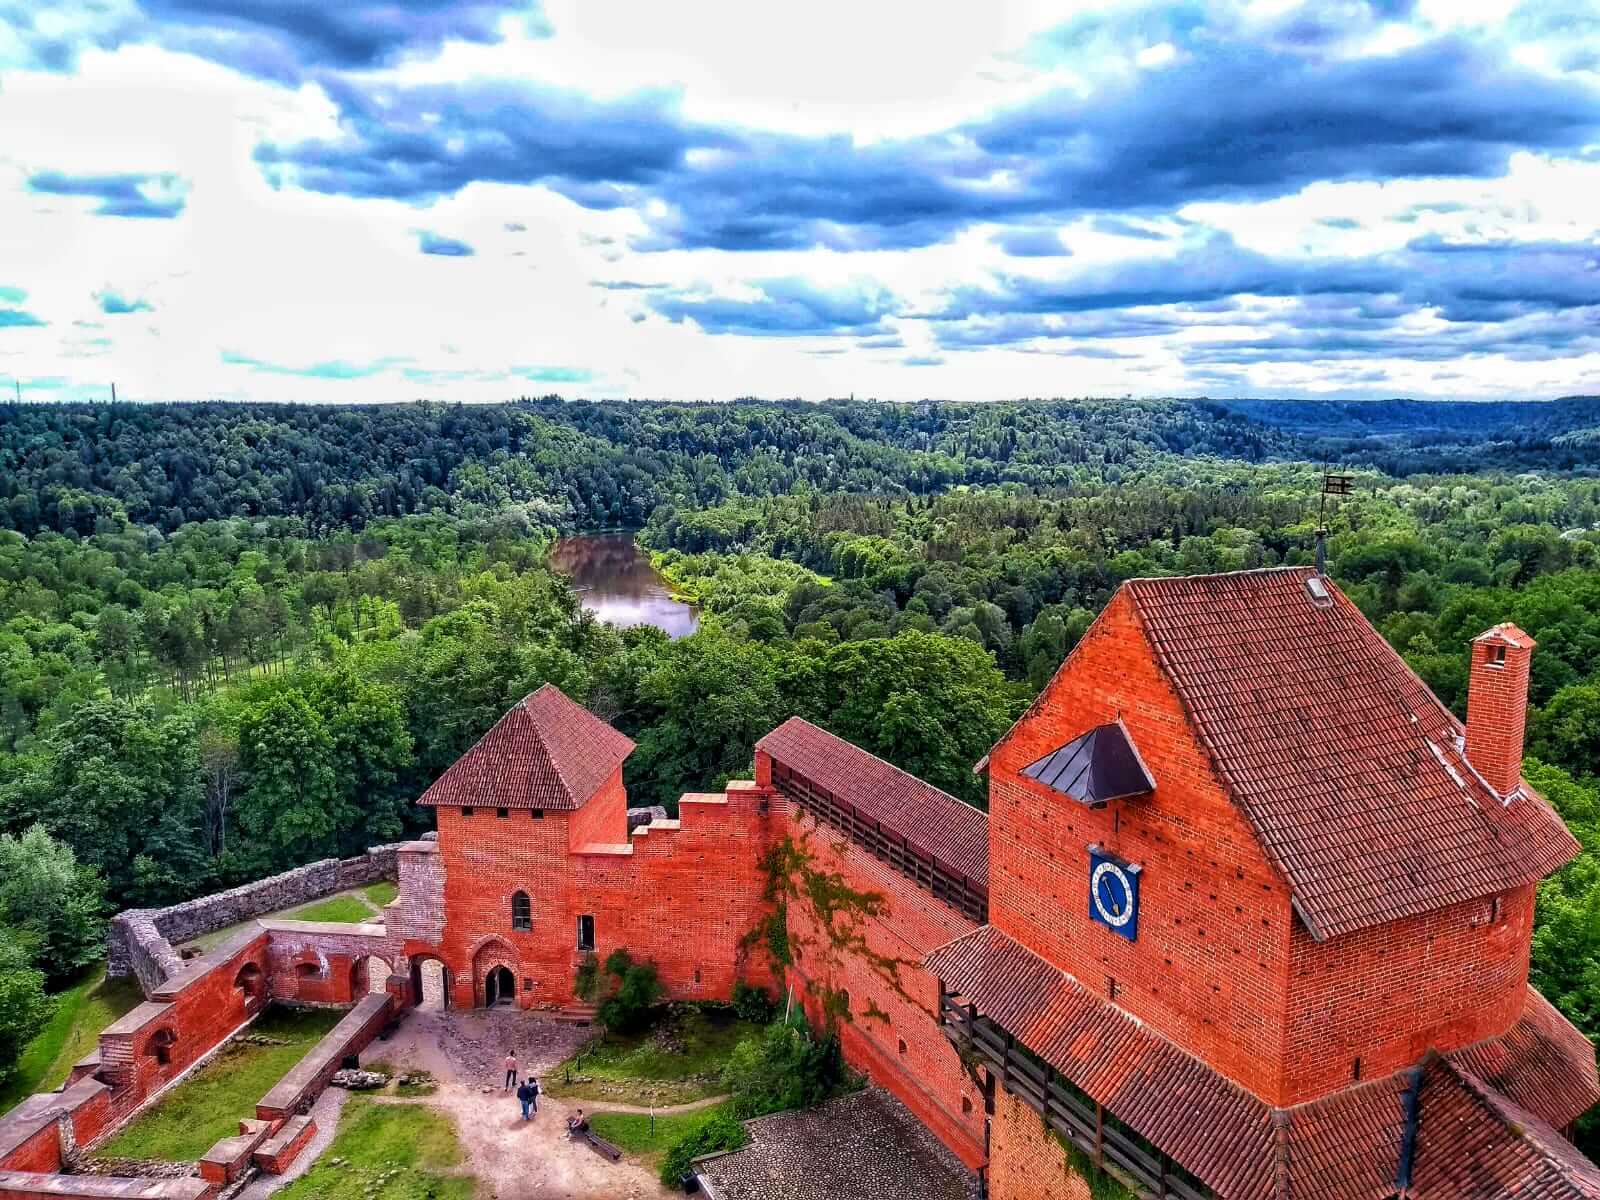 What To Do In Sigulda: A Day Trip From Riga To Sigulda